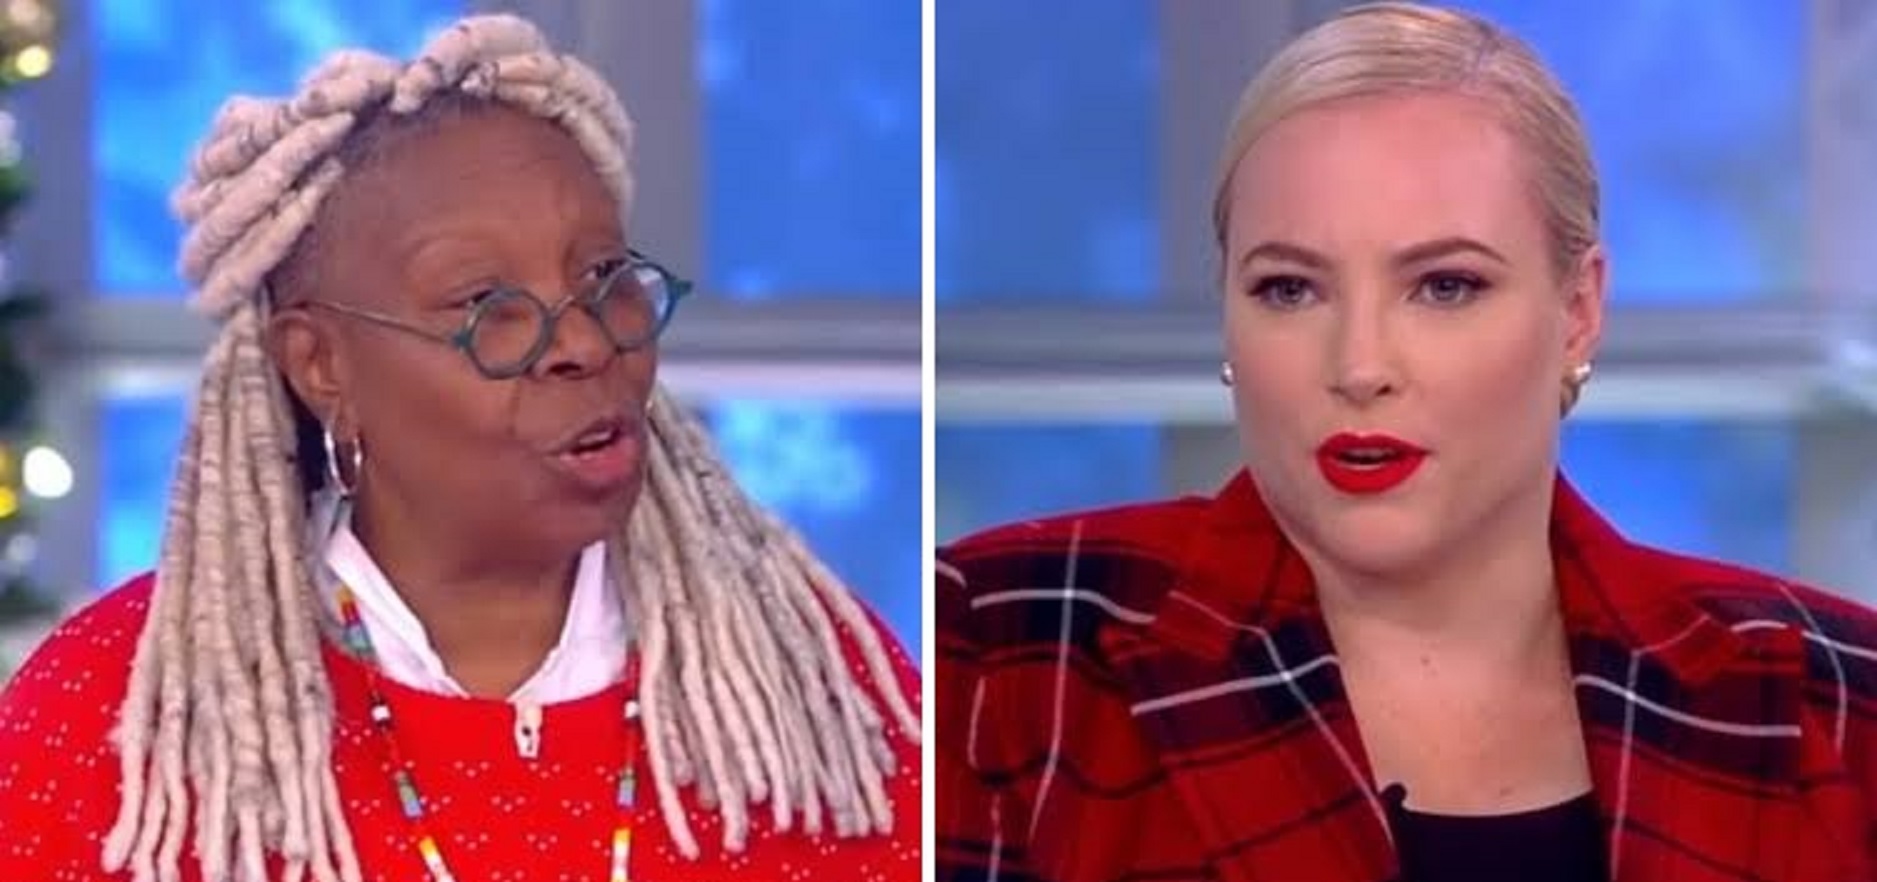 The View: Meghan McCain and Whoopi Goldberg Address ‘Girl, Stop Talking’ Moment, “We fight like we’re family”